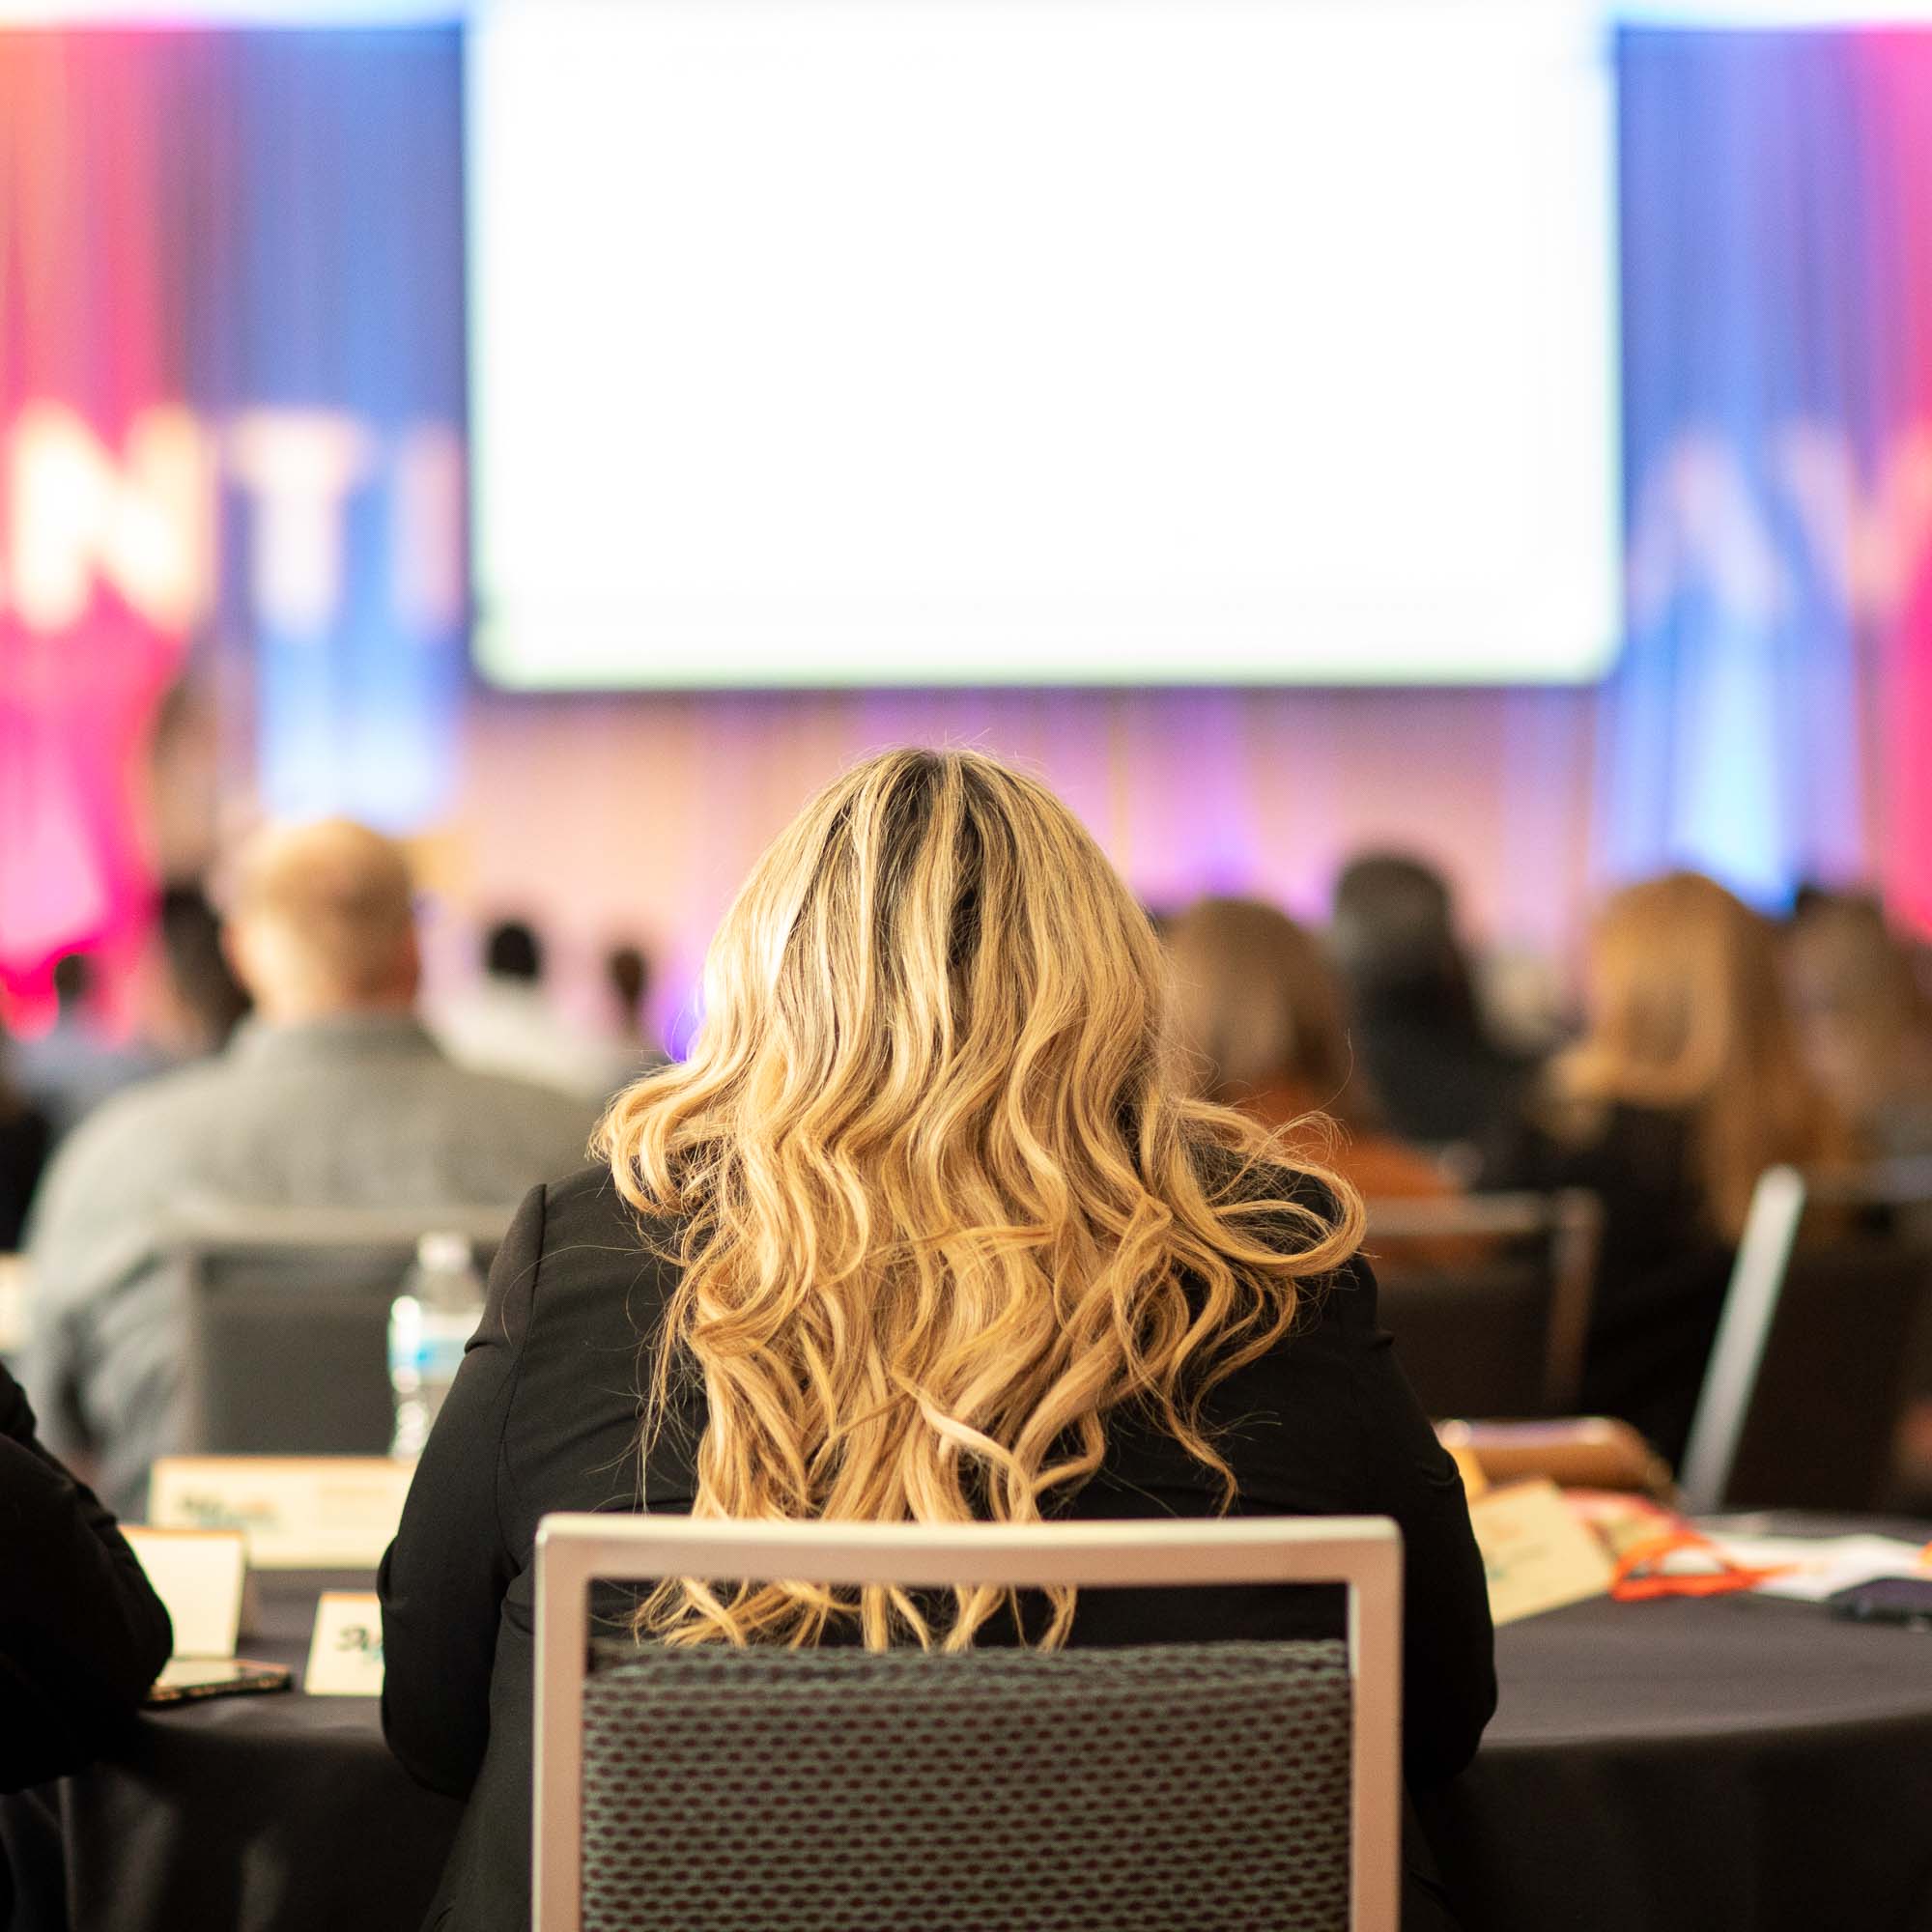 A woman looks at the stage during a corporate conference